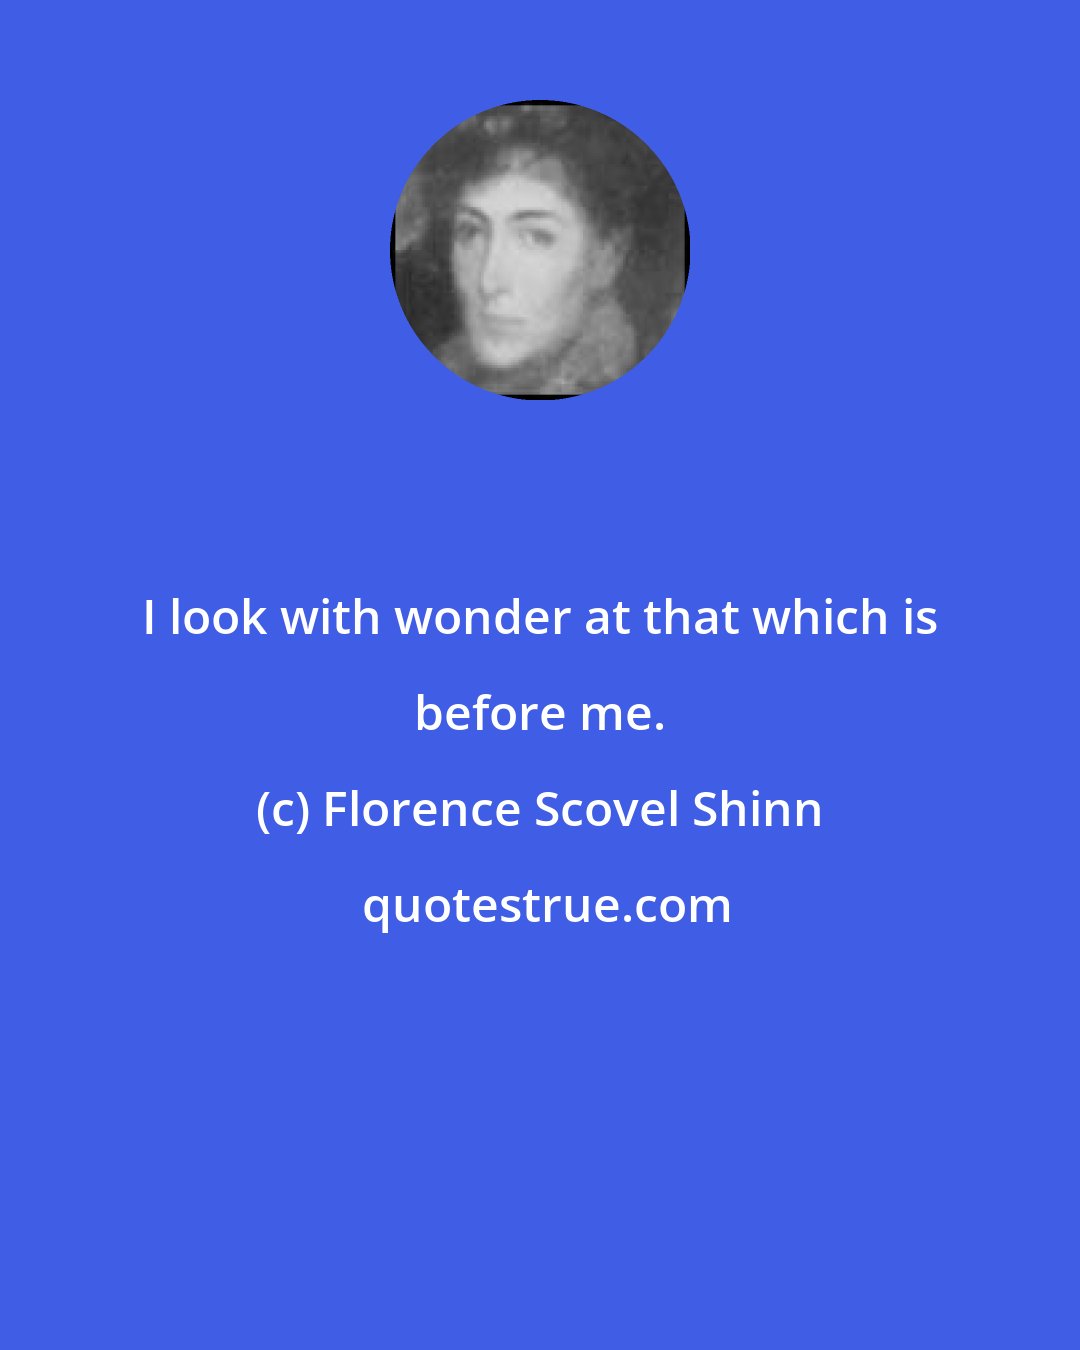 Florence Scovel Shinn: I look with wonder at that which is before me.